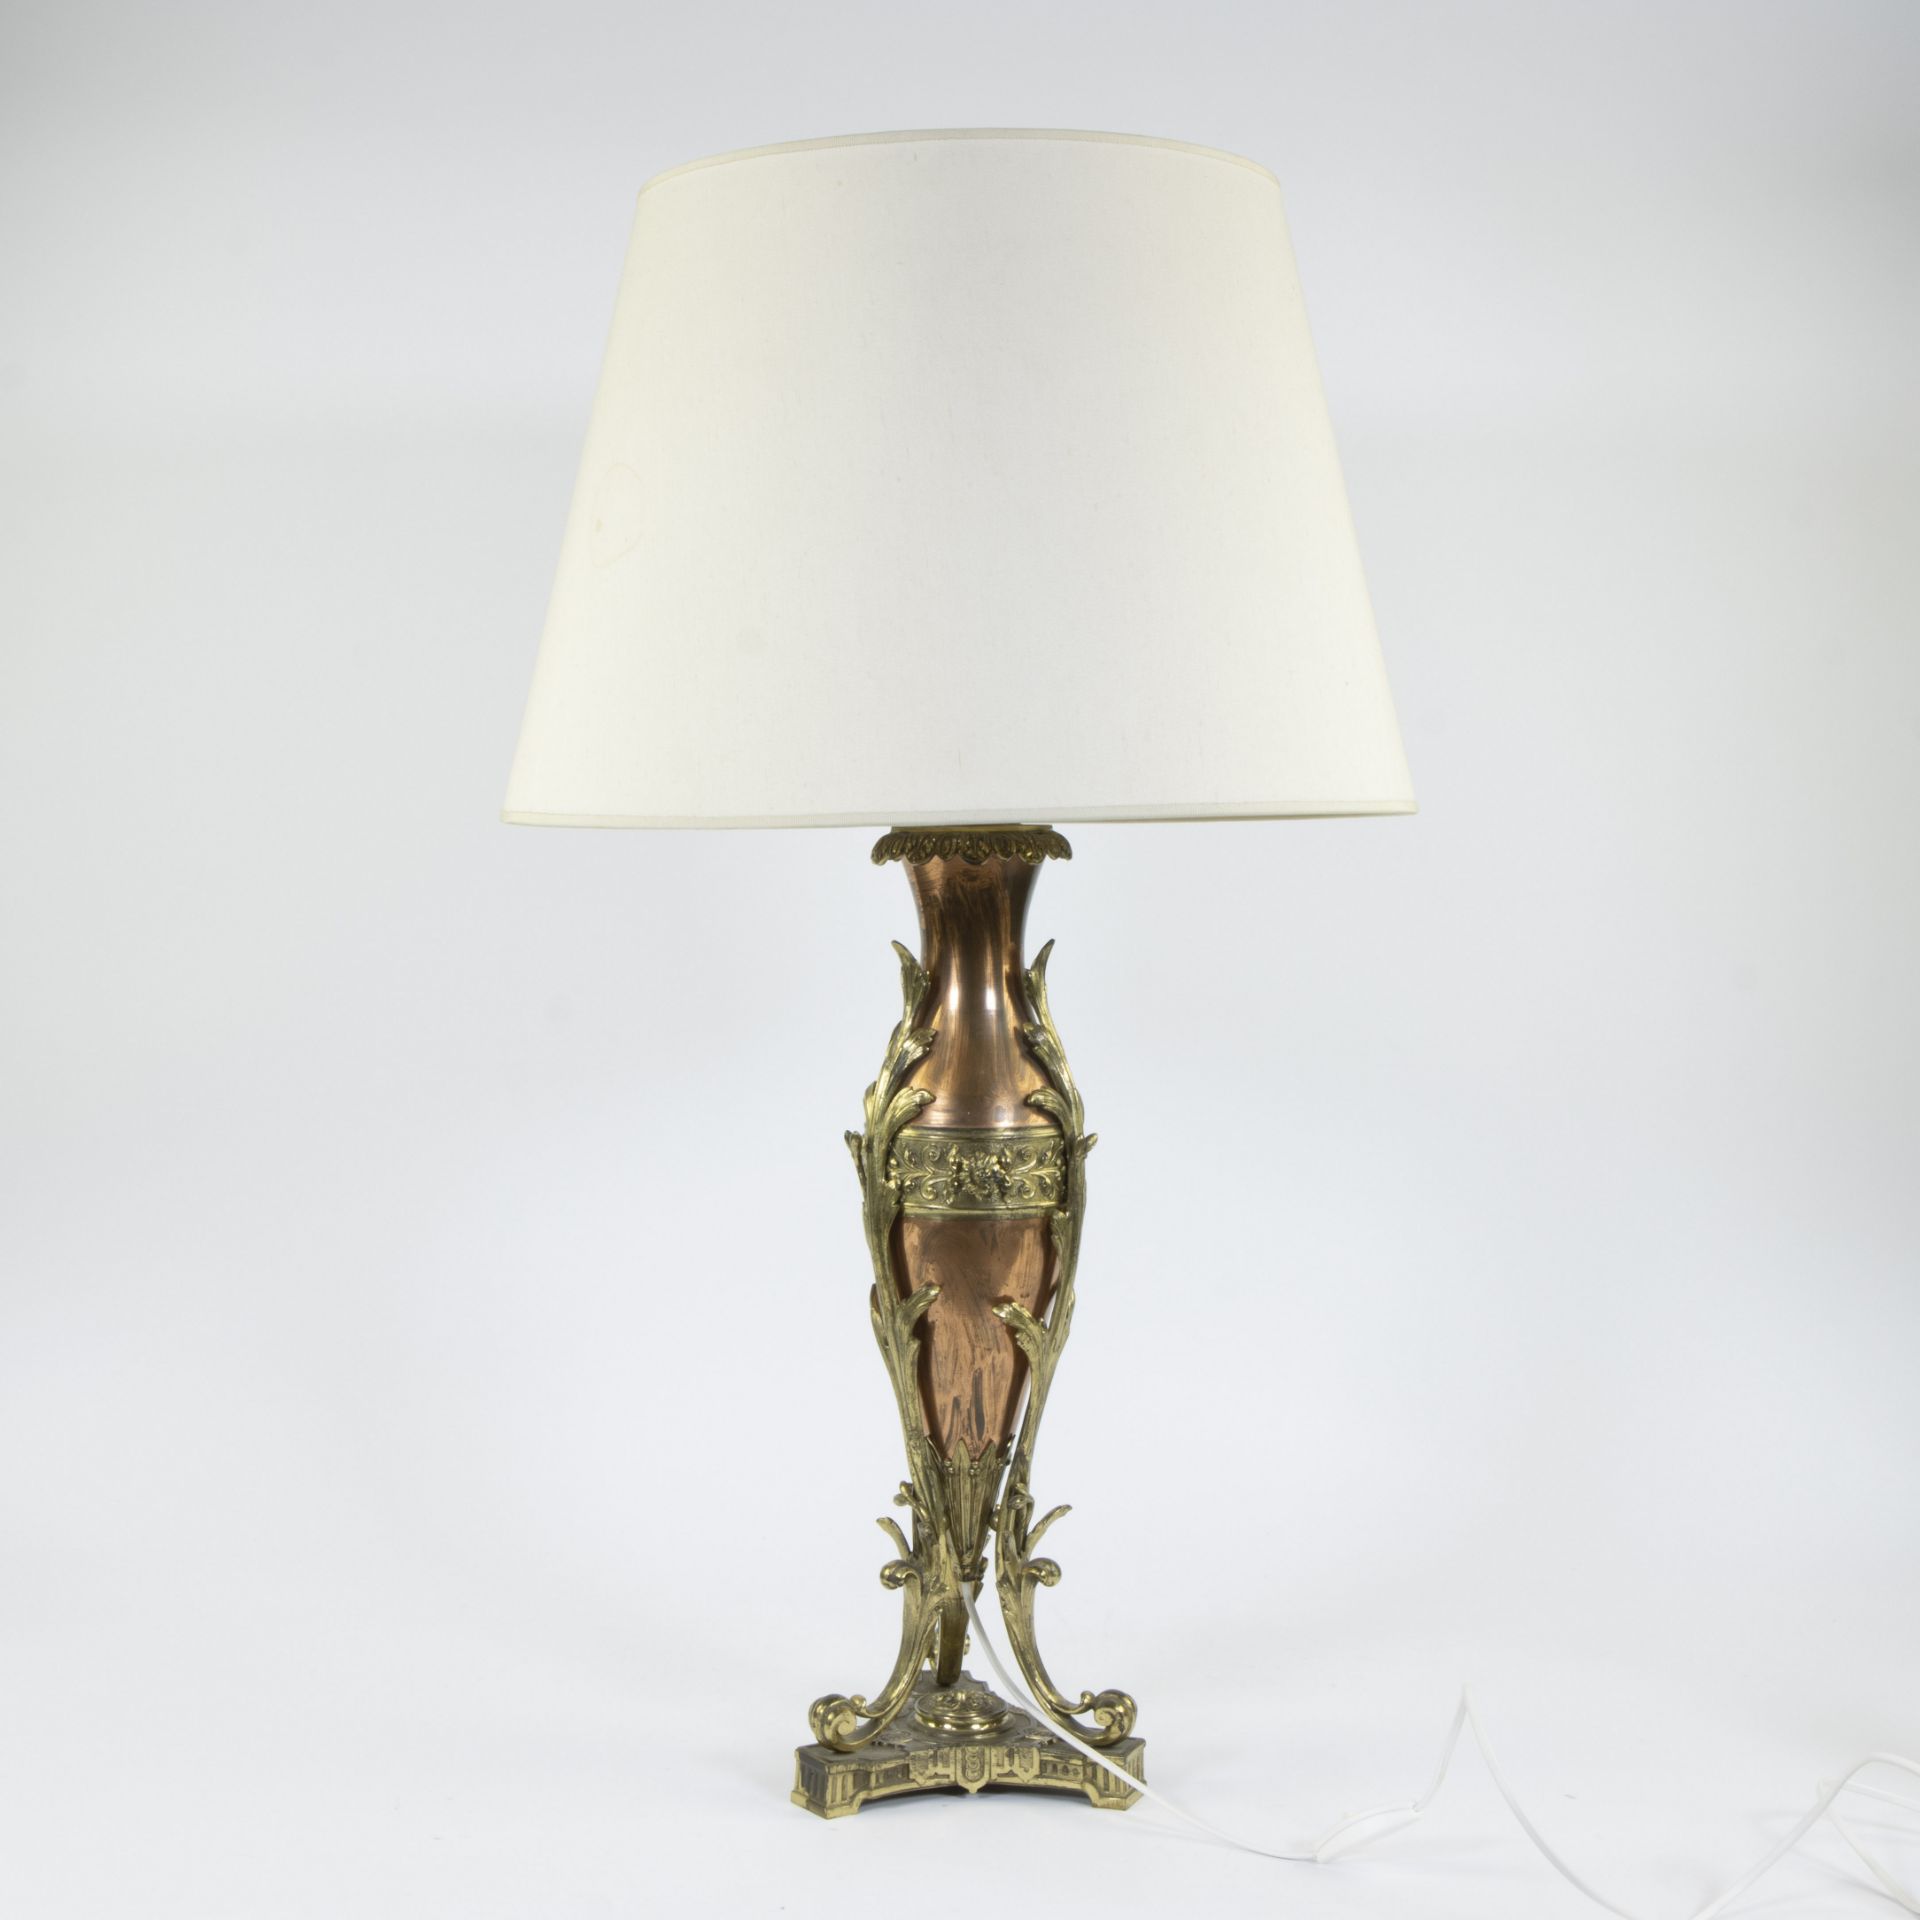 Lampadaire with base in copper and gilt brass, early 20th century - Bild 3 aus 4